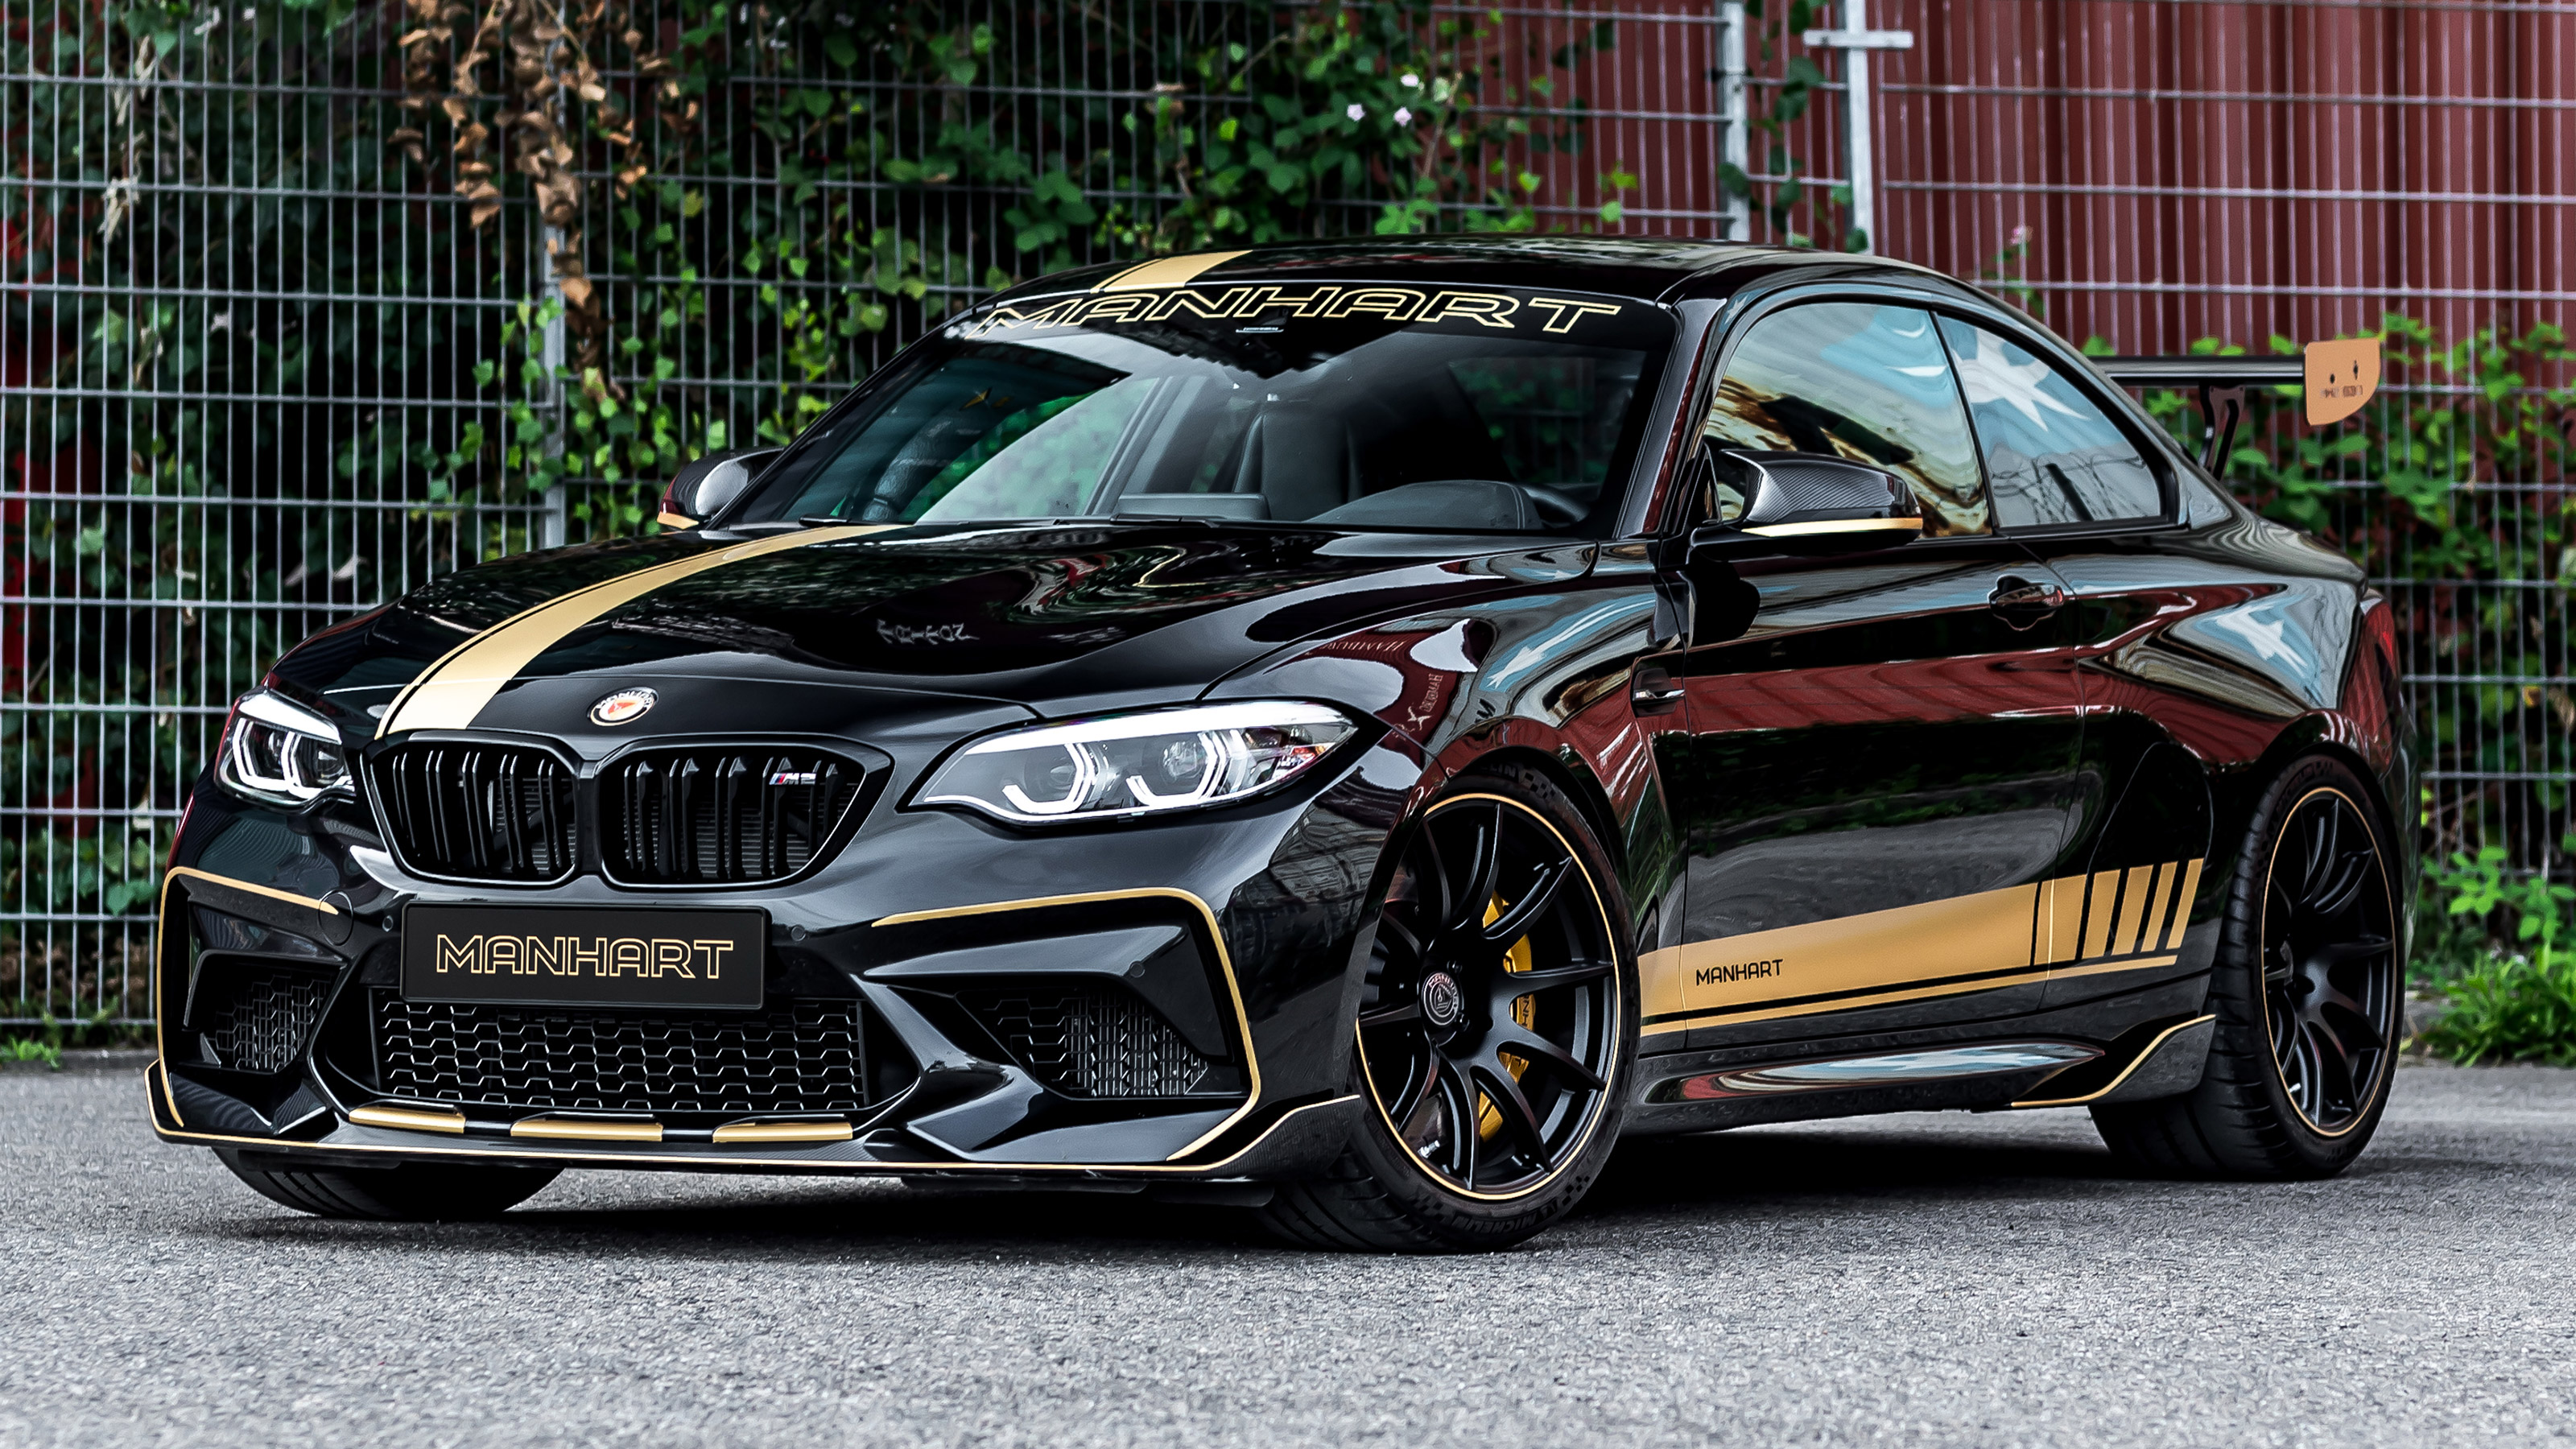 The BMW F87 M2 Buyer's guide